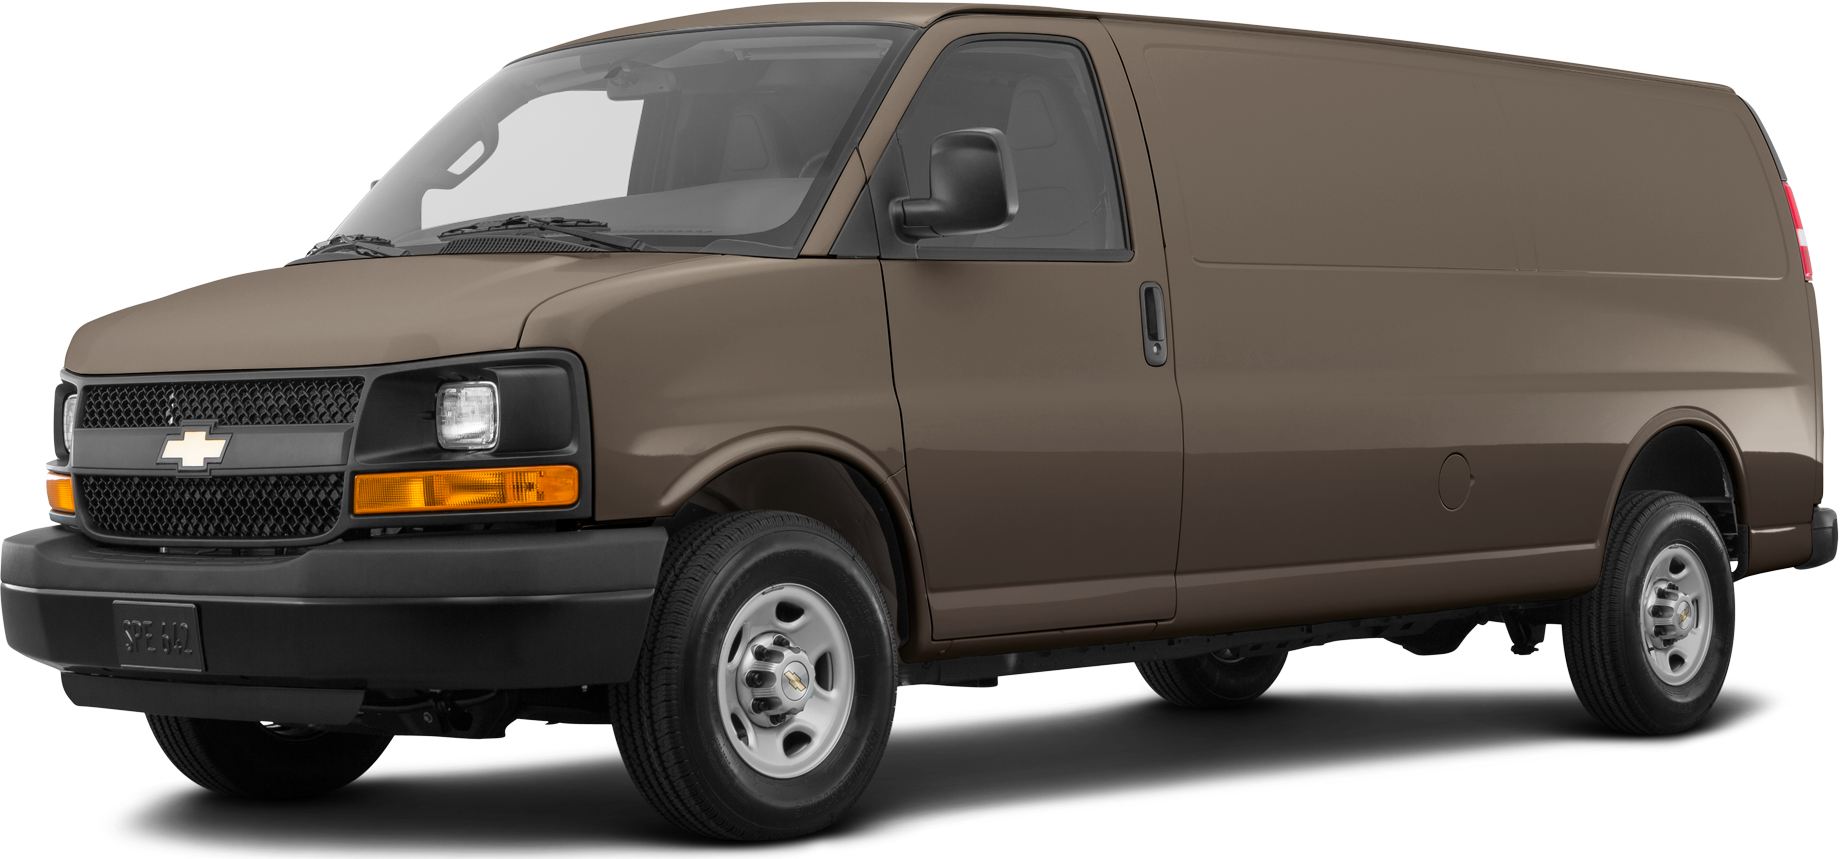 2016 Chevrolet Express 3500 Cargo Values & Cars for Sale | Kelley Blue Book